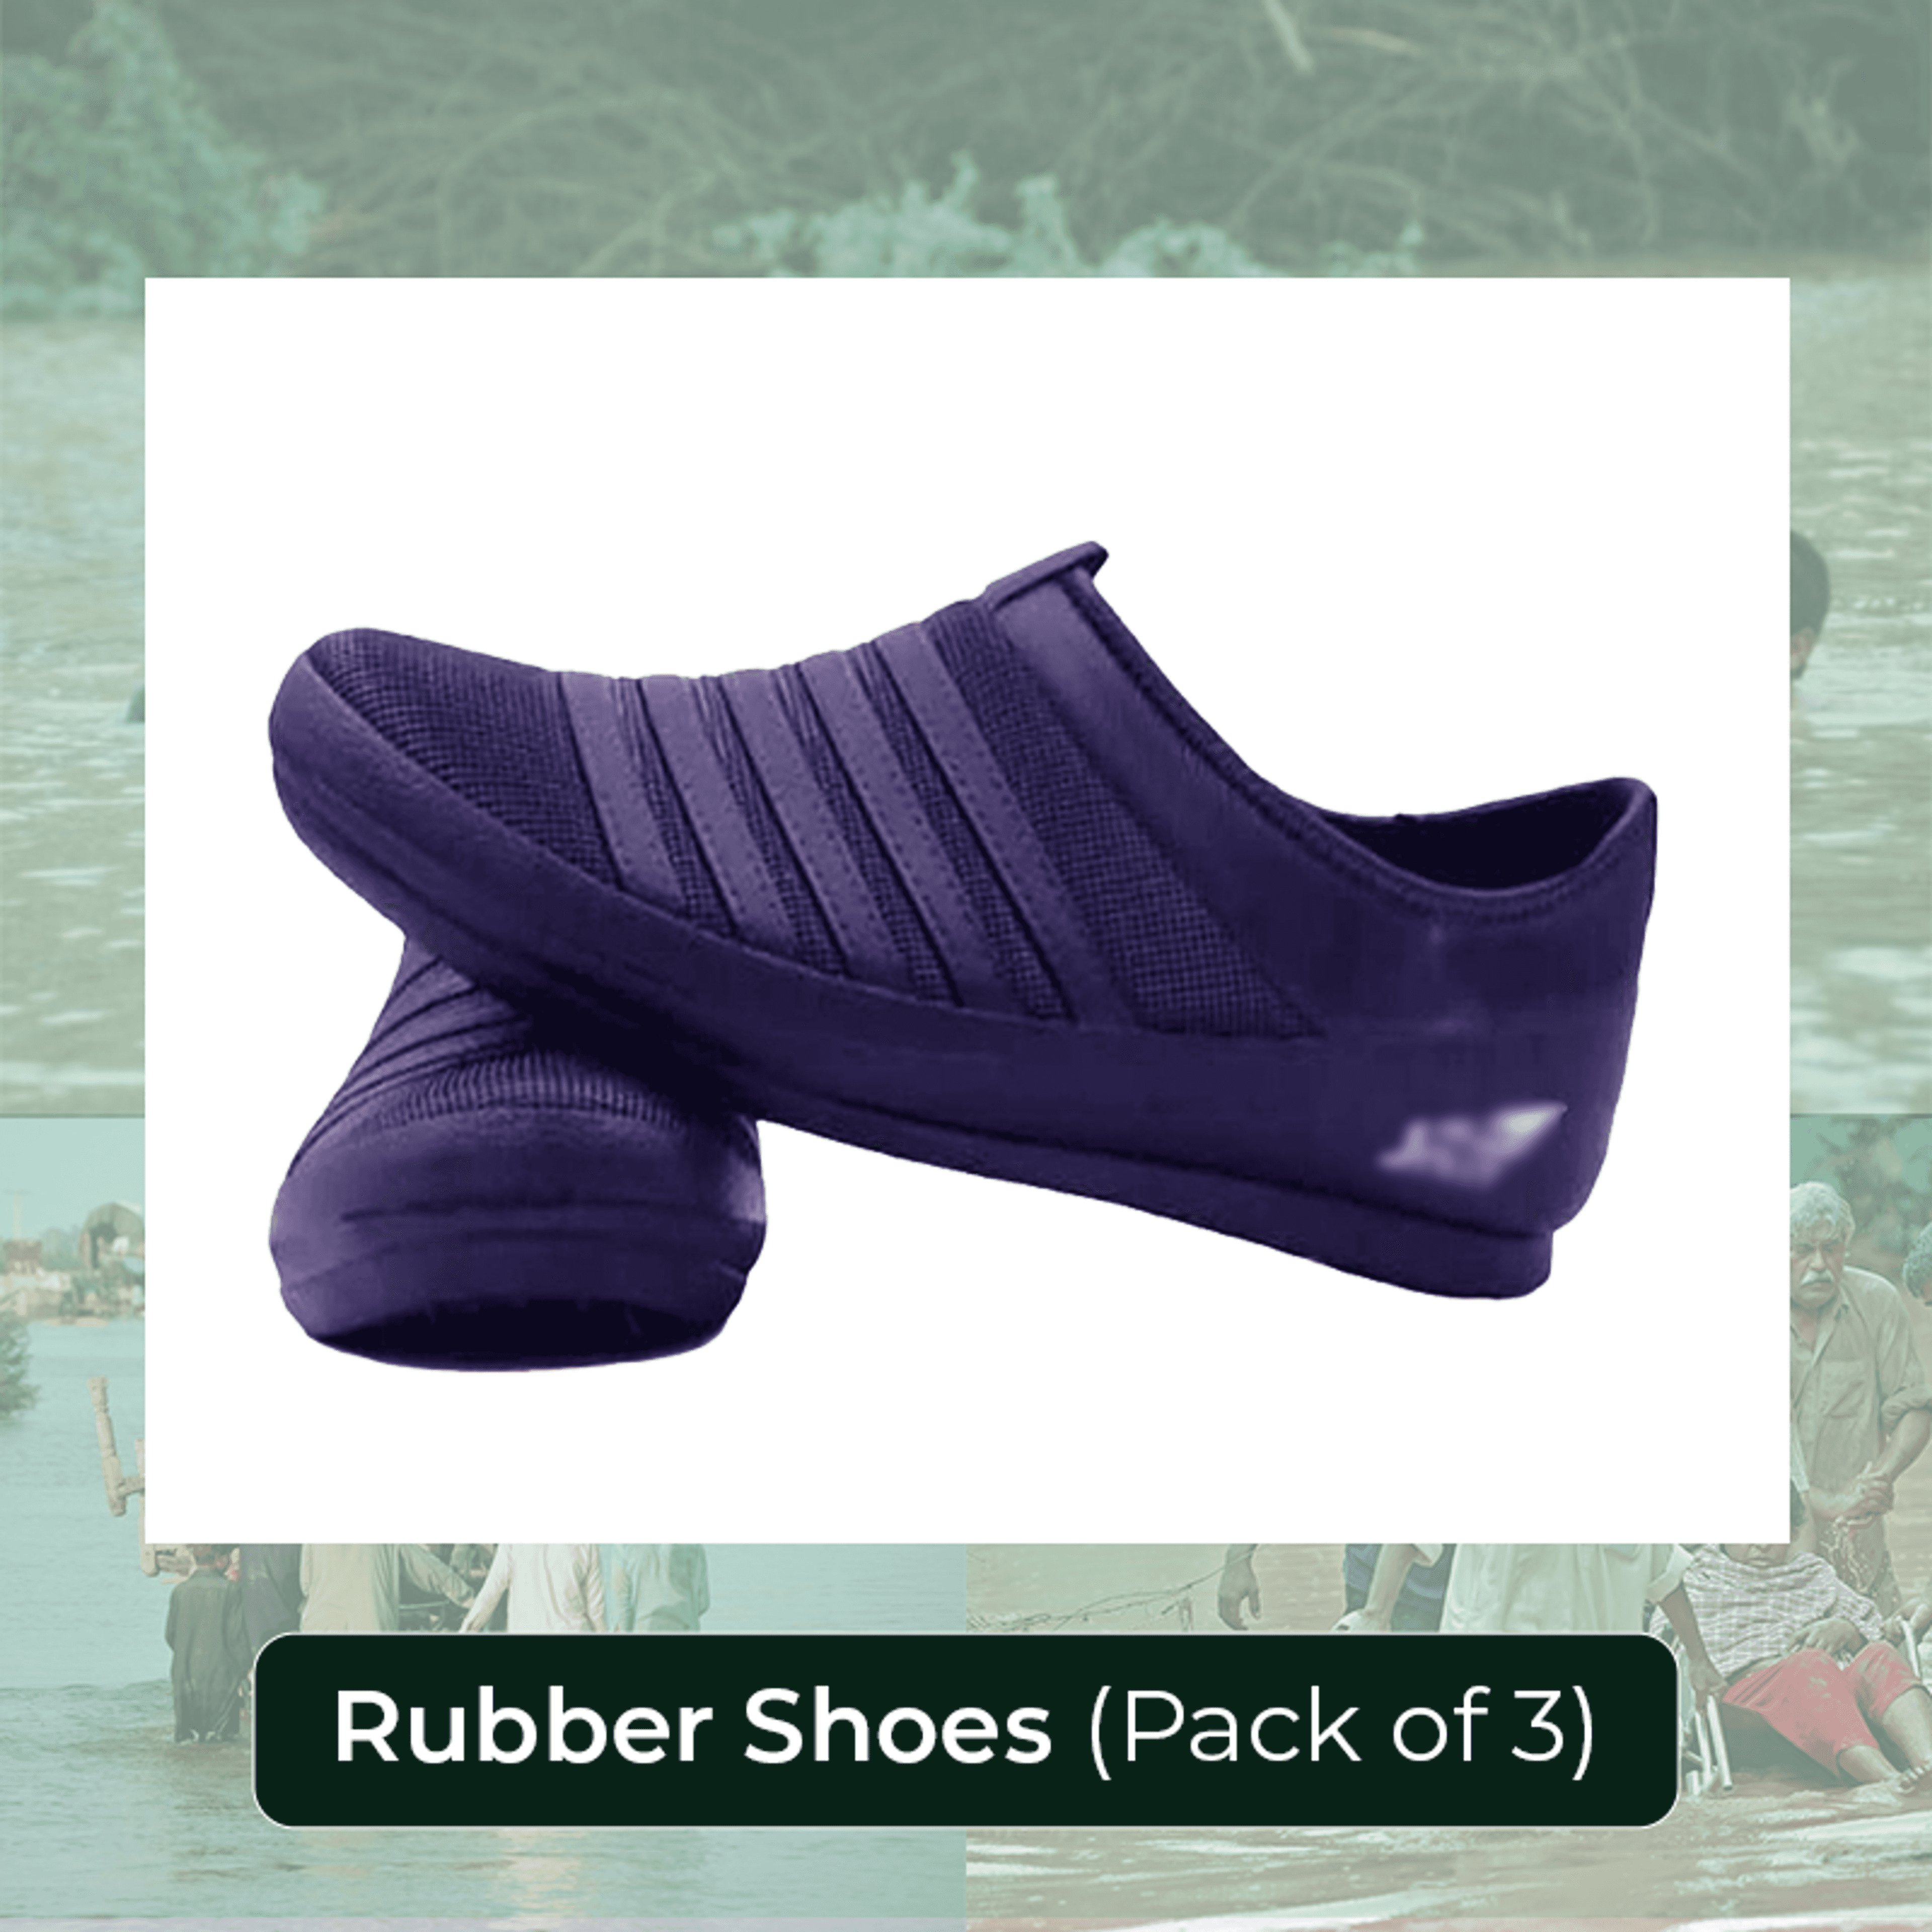 Pack of 3 - Adults Rubber Shoes Size 8,9,10